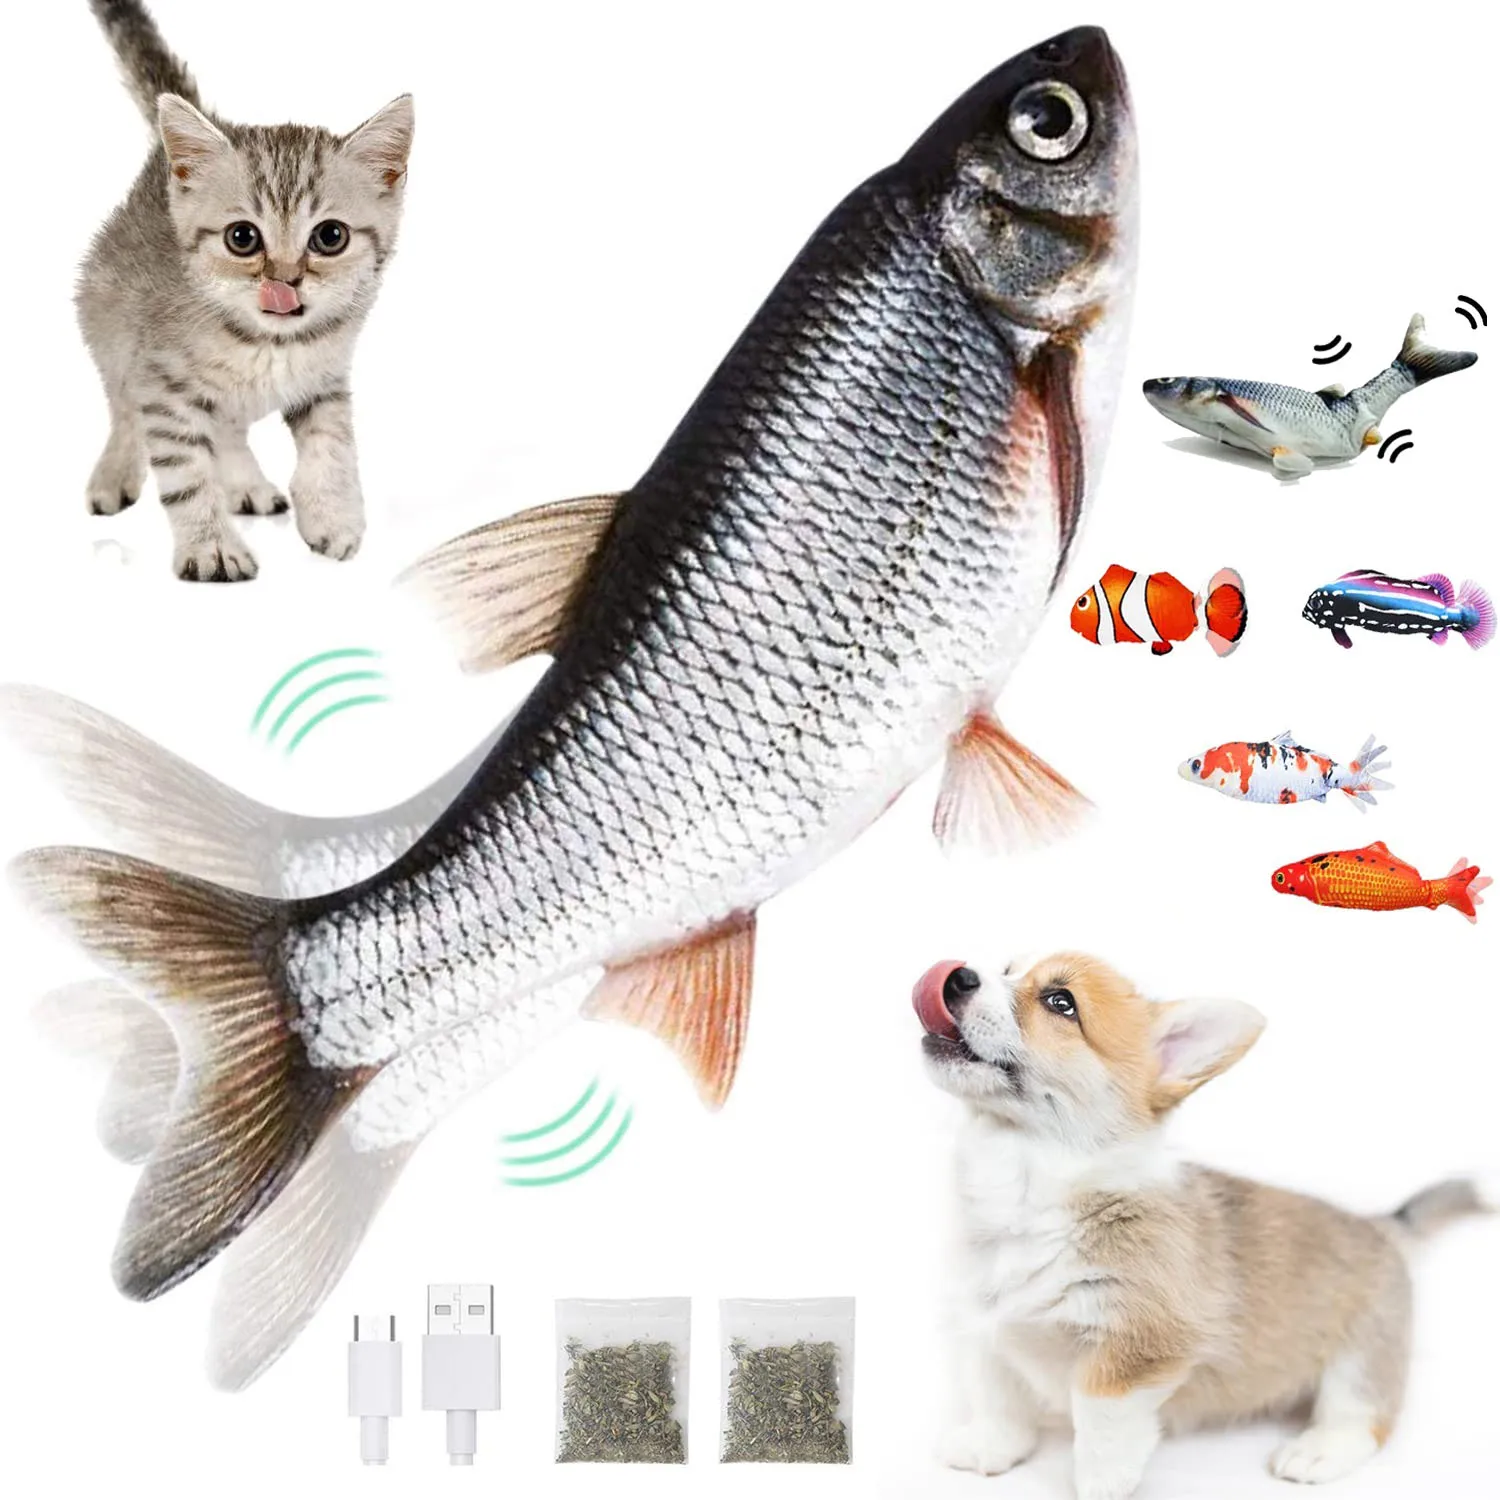 https://ae01.alicdn.com/kf/S37ca0e658760450092a4d916b274bc32G/Flopping-Fish-Toy-for-Dogs-Electric-Moving-Realistic-Wiggle-Fish-Catnip-Cat-Toys-Automatic-Pet-Chew.jpg